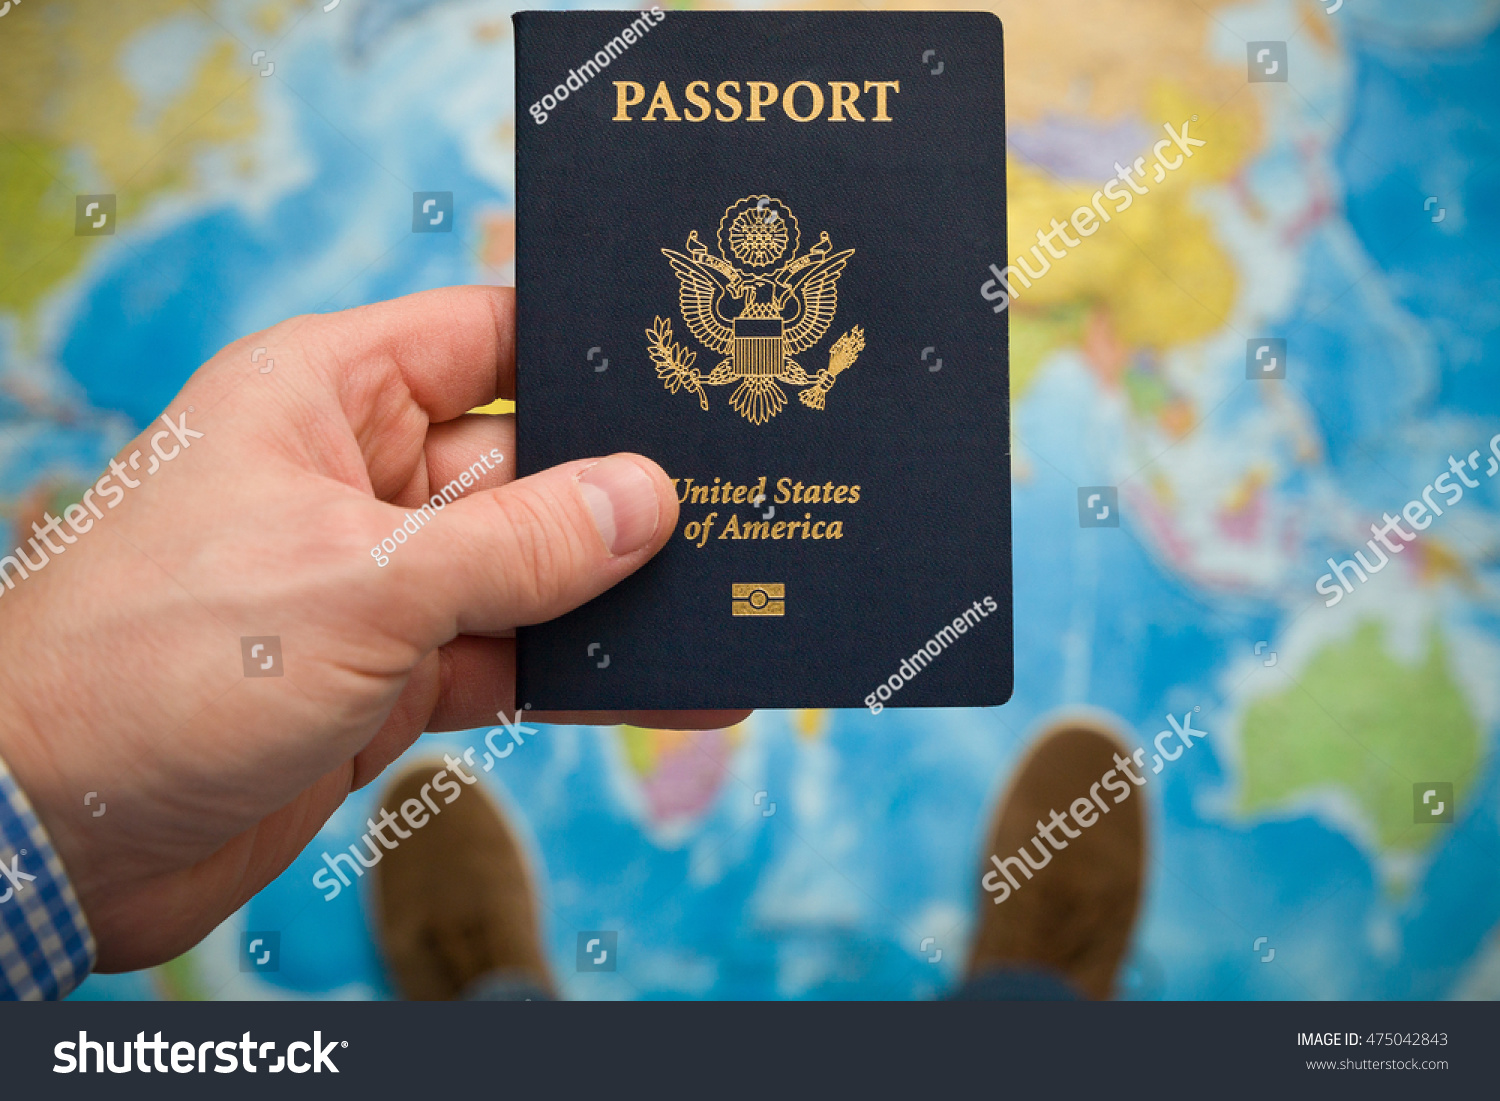 Man's hand holding US passport. Map background. Ready for traveling. Open world. #475042843